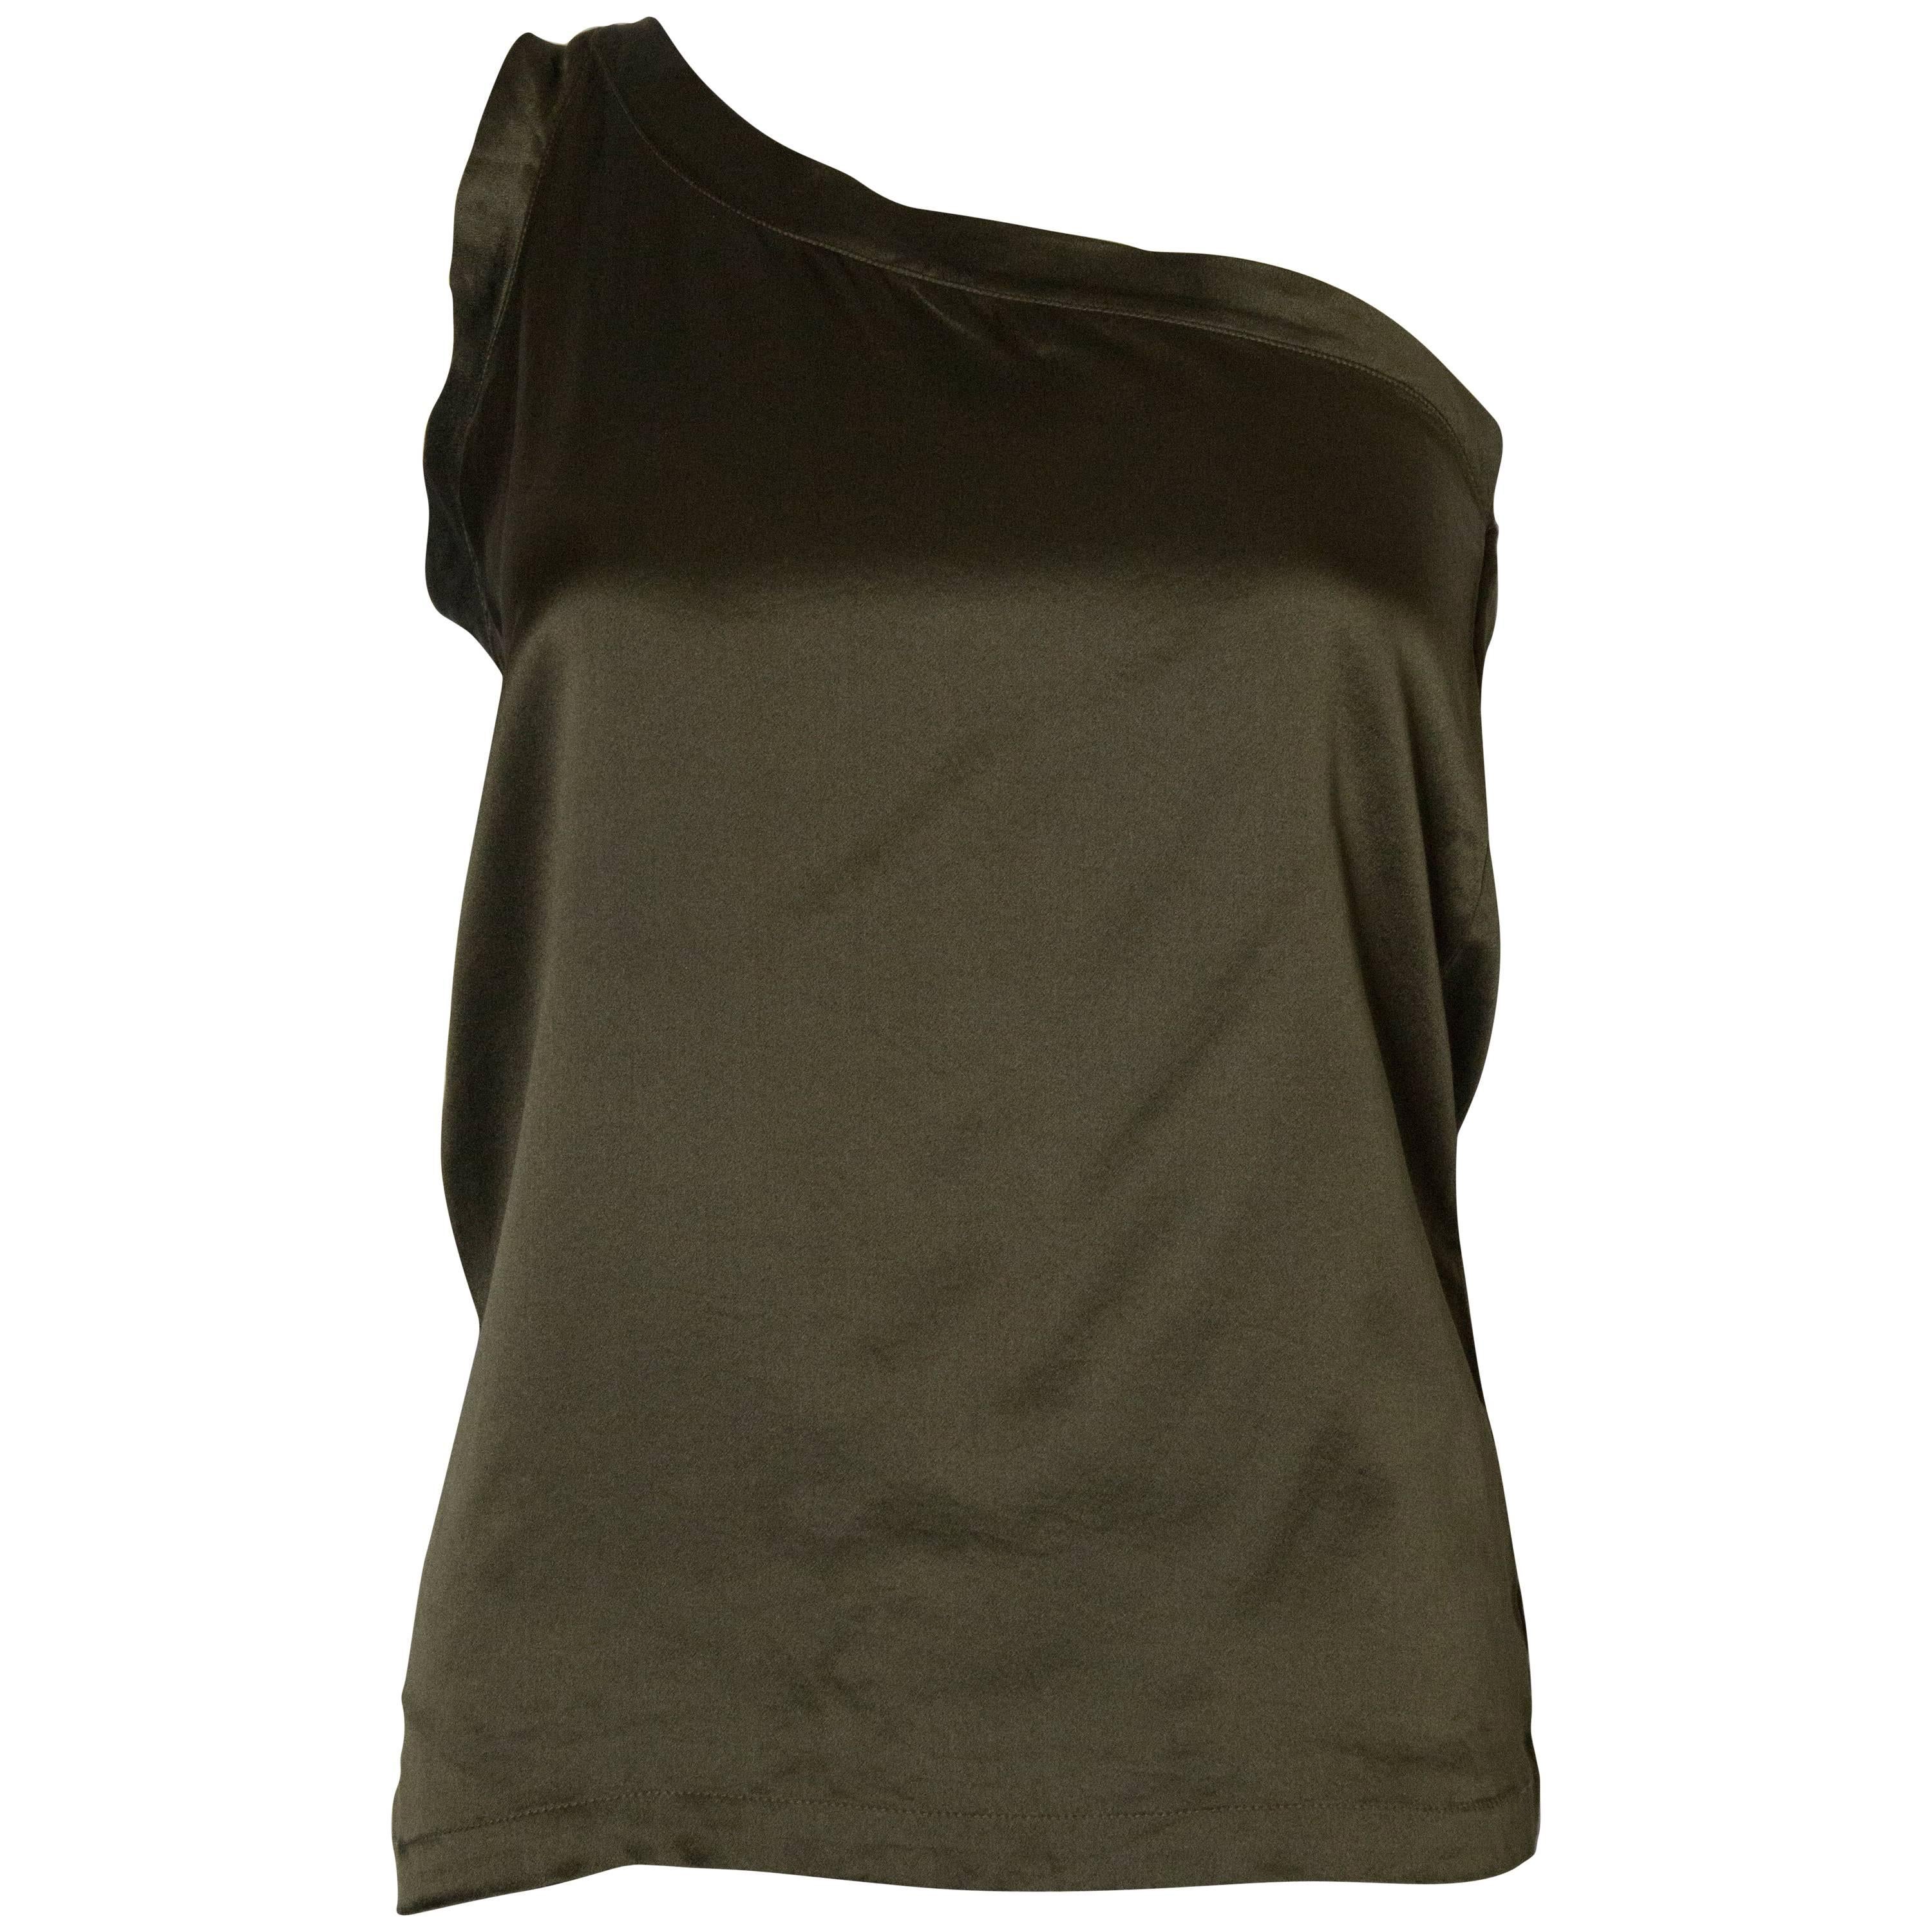 A Vintage 1990s olive green one shoulder silk top  by Yves Saint Laurent